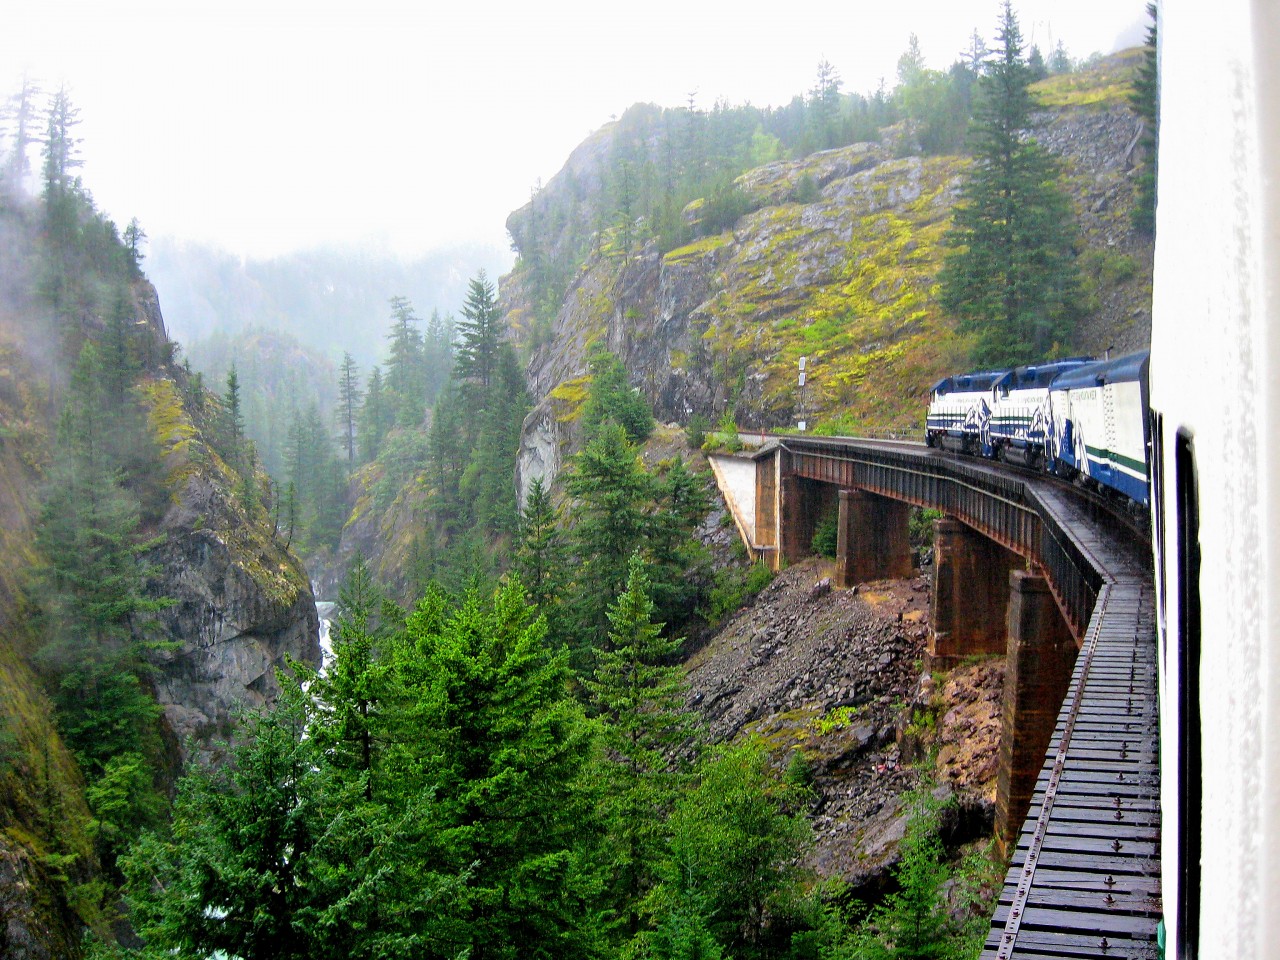 ROCKY MOUNTAIN HIGH. Mist and rain were the order of the day as the Whistler Mountaineer crossed the Cheakamus Canyon Trestle on August 24, 2008. Departing North Vancouver with his oldest son William on a Father-Son trip to Whistler, the photographer was able to capture a part of British Columbia in all its rugged beauty from an open air car as the train climbed some 2000 feet from sea level at Squamish until departure at Whistler.